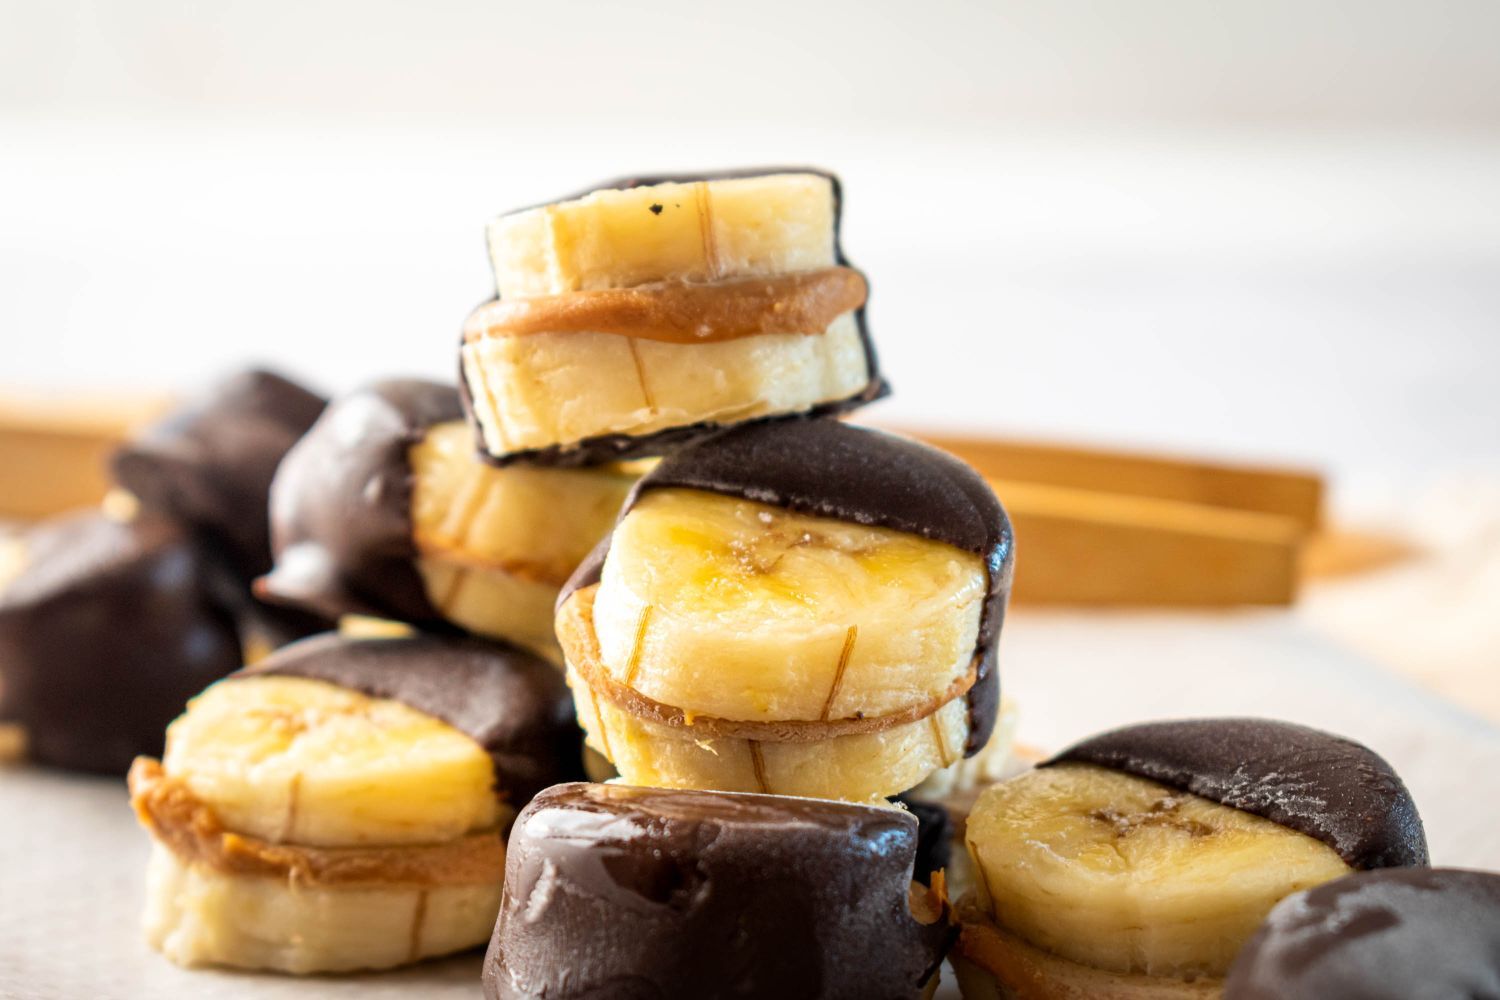 Frozen banana bites with chocolate and peanut butter.